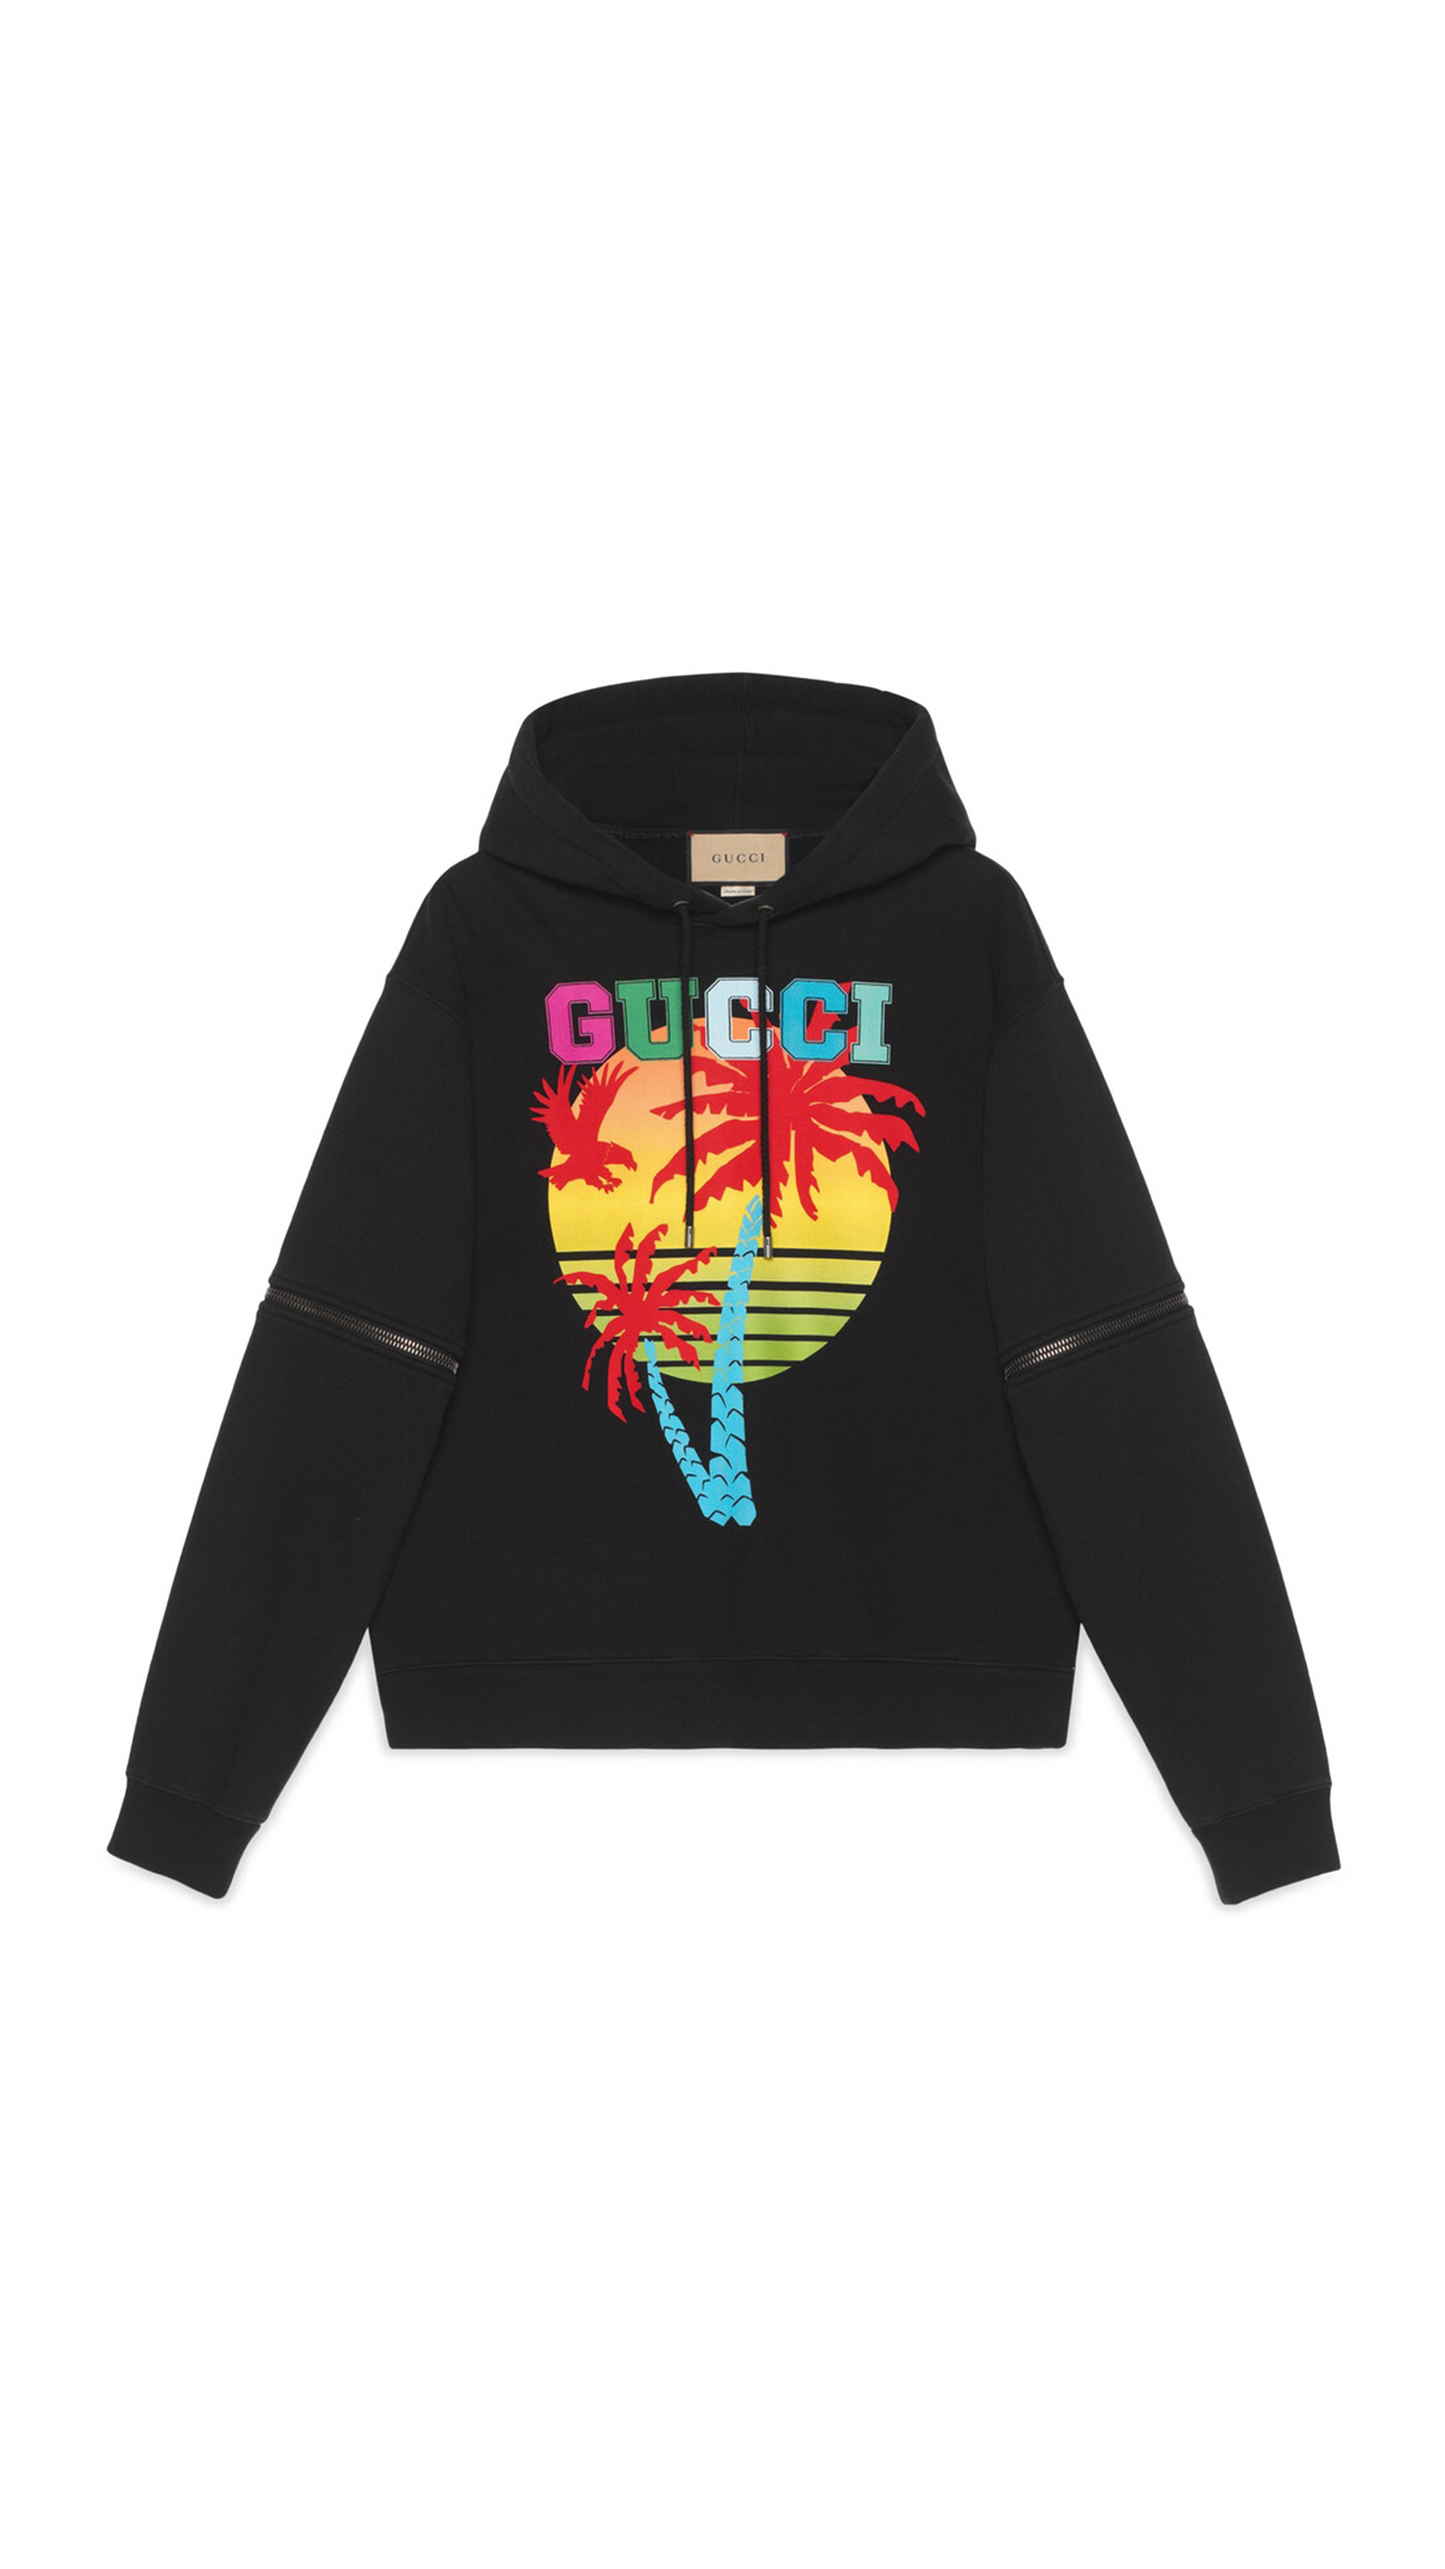 Gucci Sunset Sweatshirt with Removable Sleeves - Black